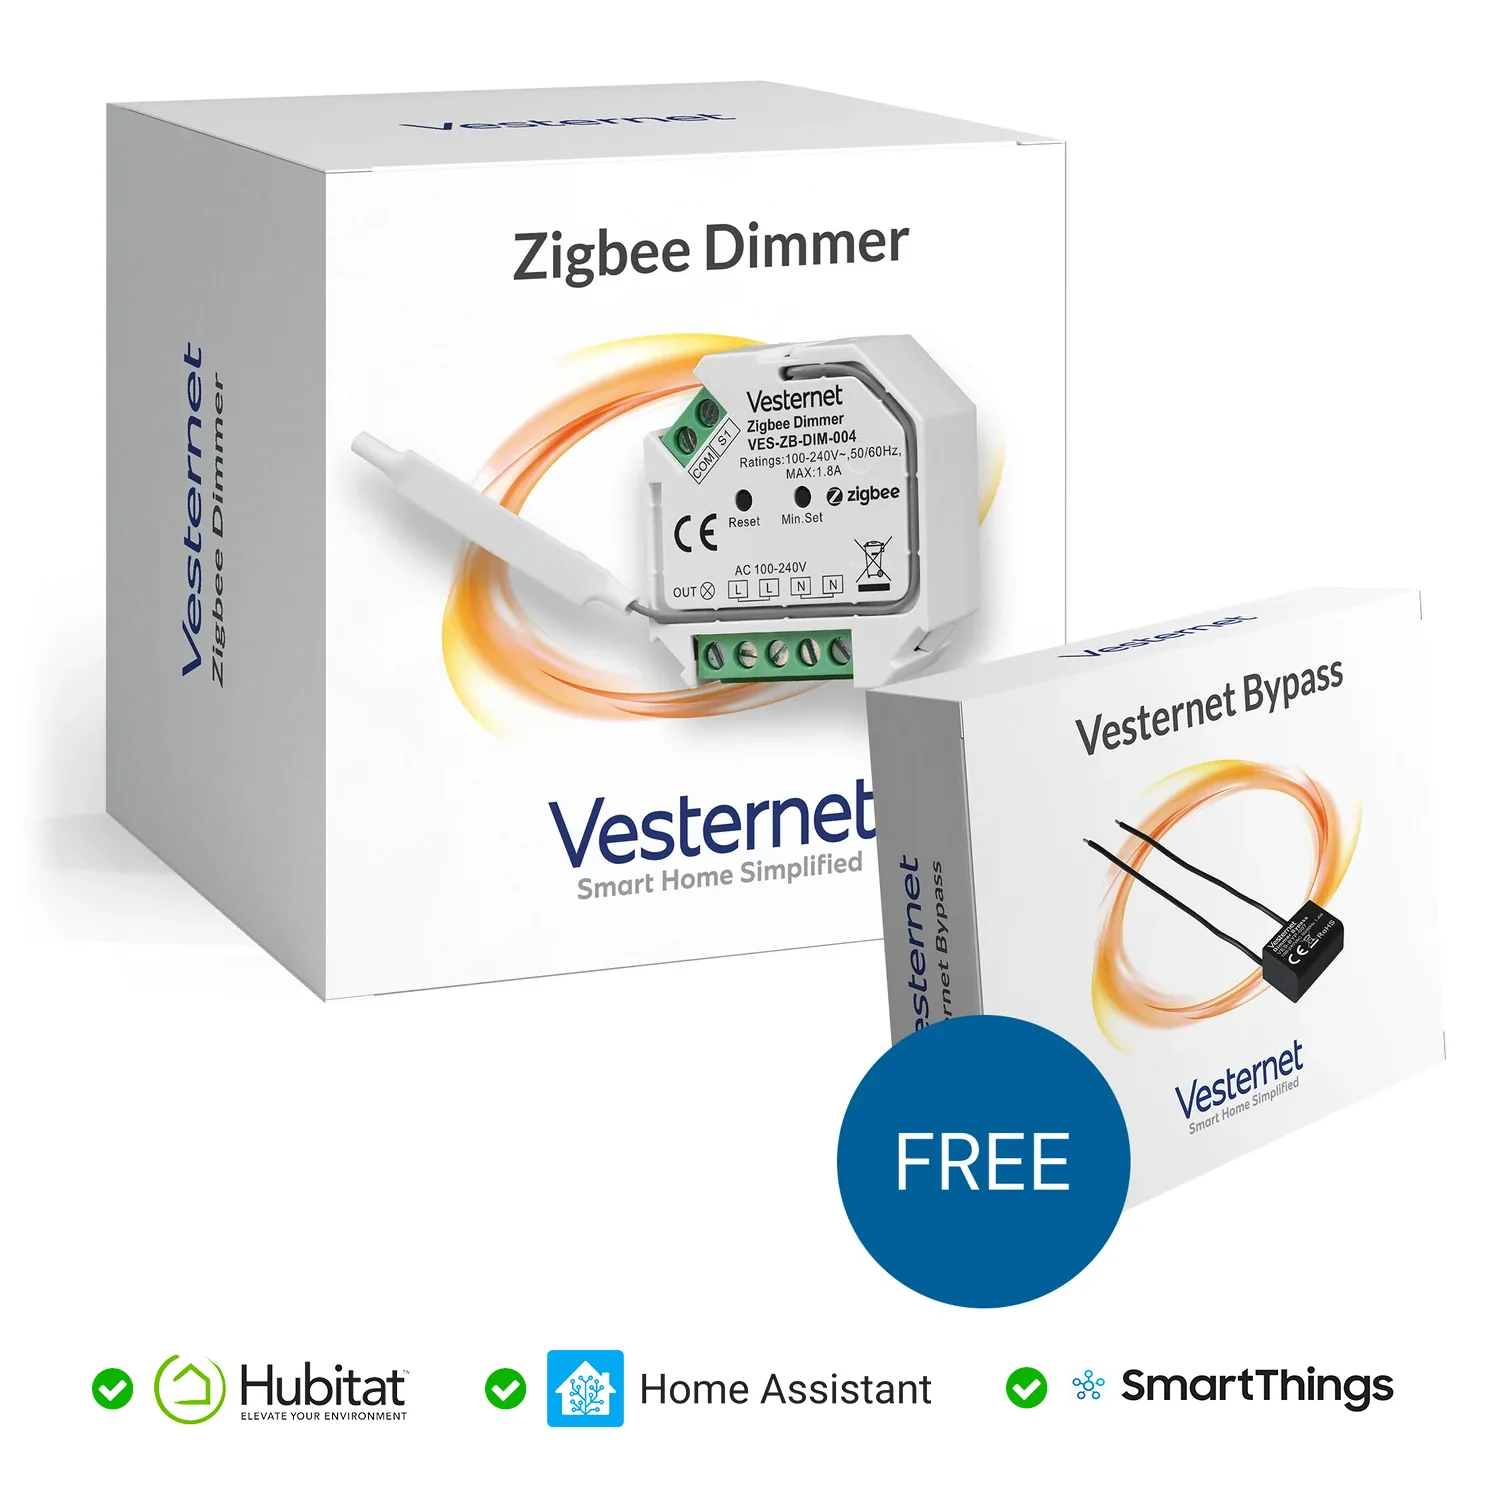 Does this Zigbee dimmer module have multiple channels?